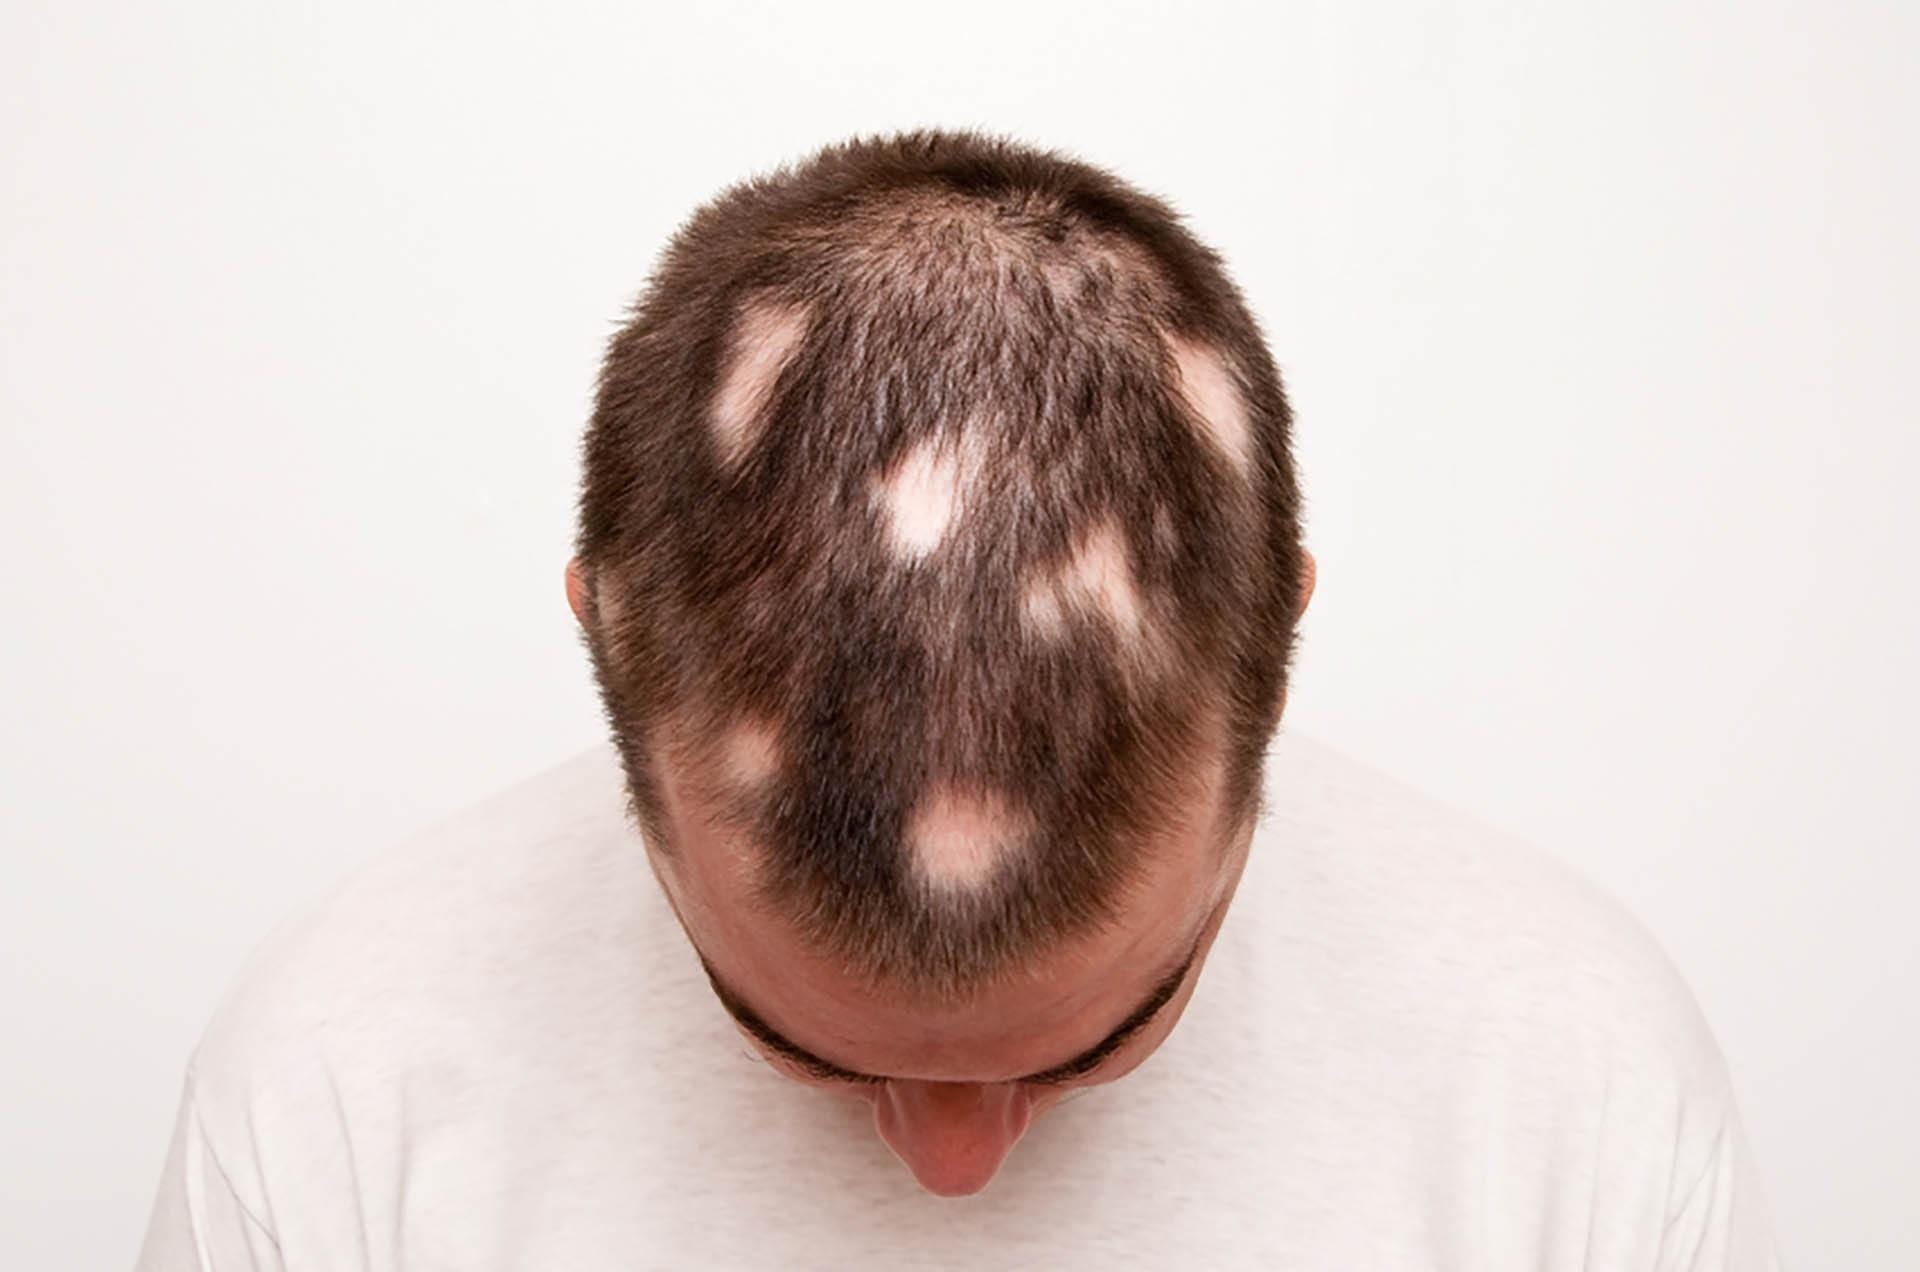 Laser Treatment for Hair Loss Does It Work